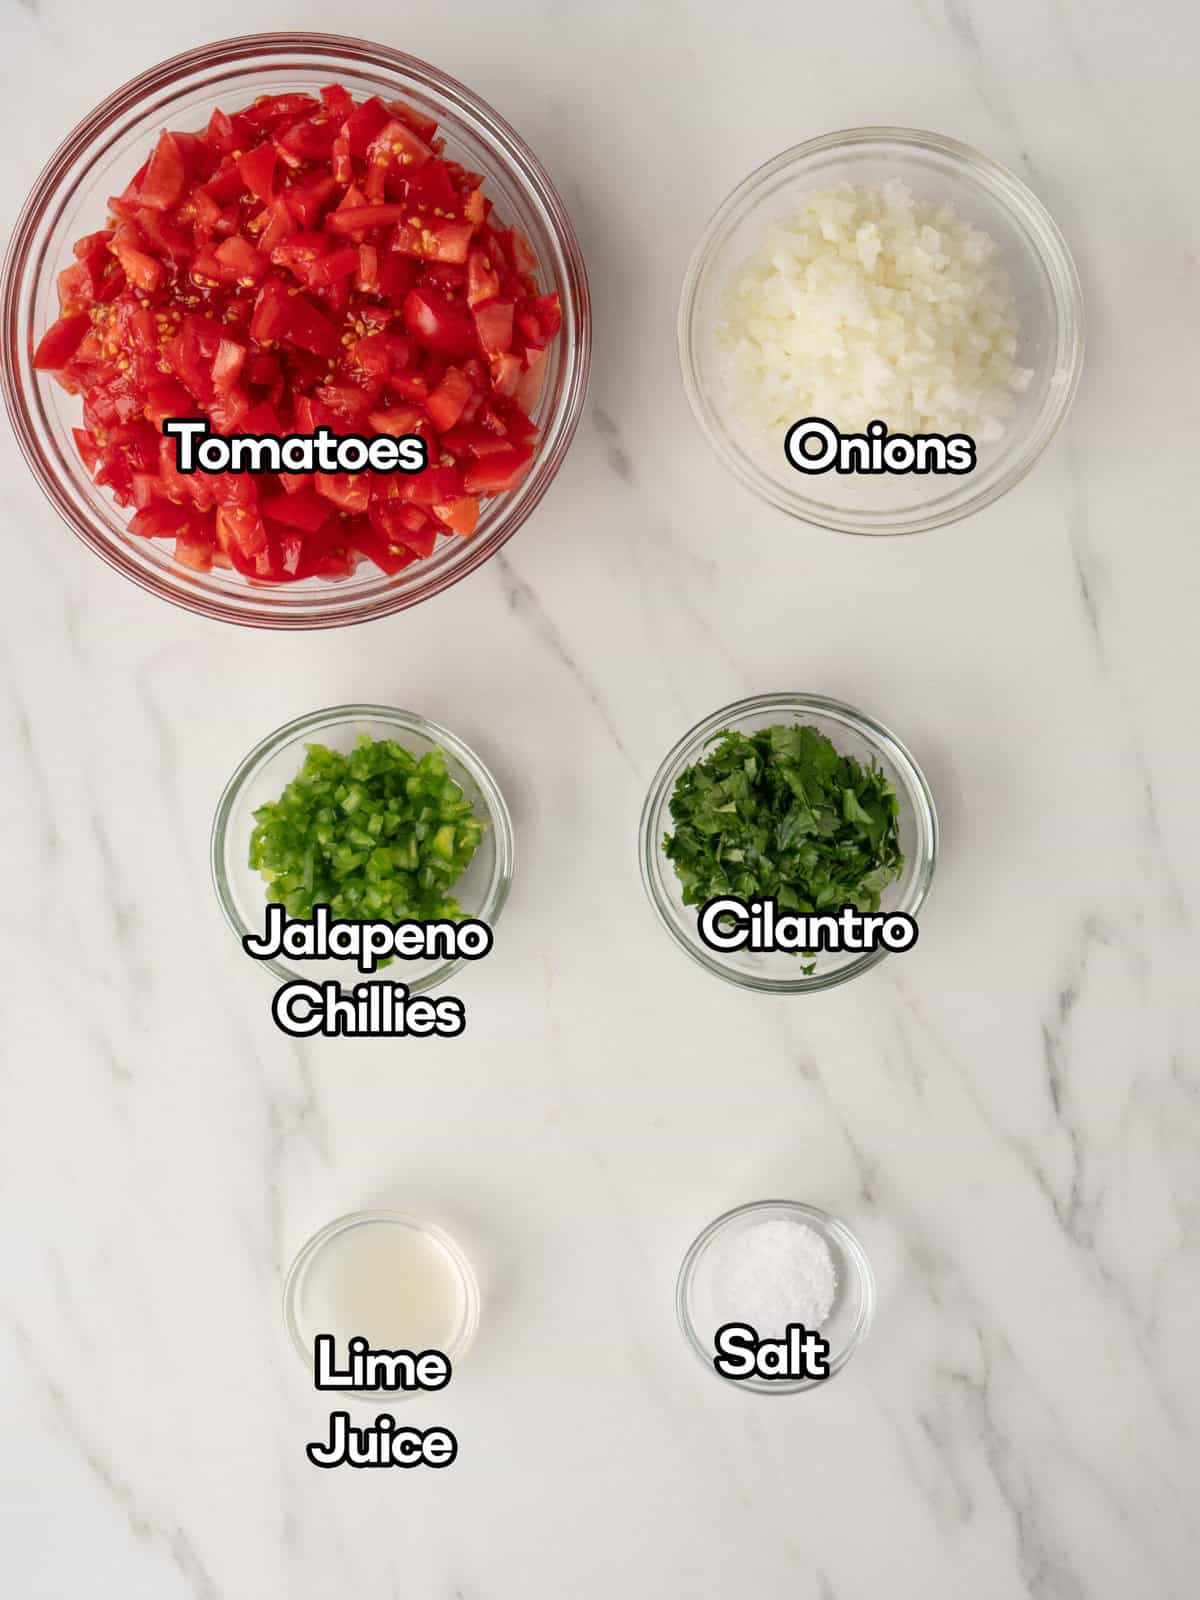 Mise en place of all ingredients to make pico de gallo.